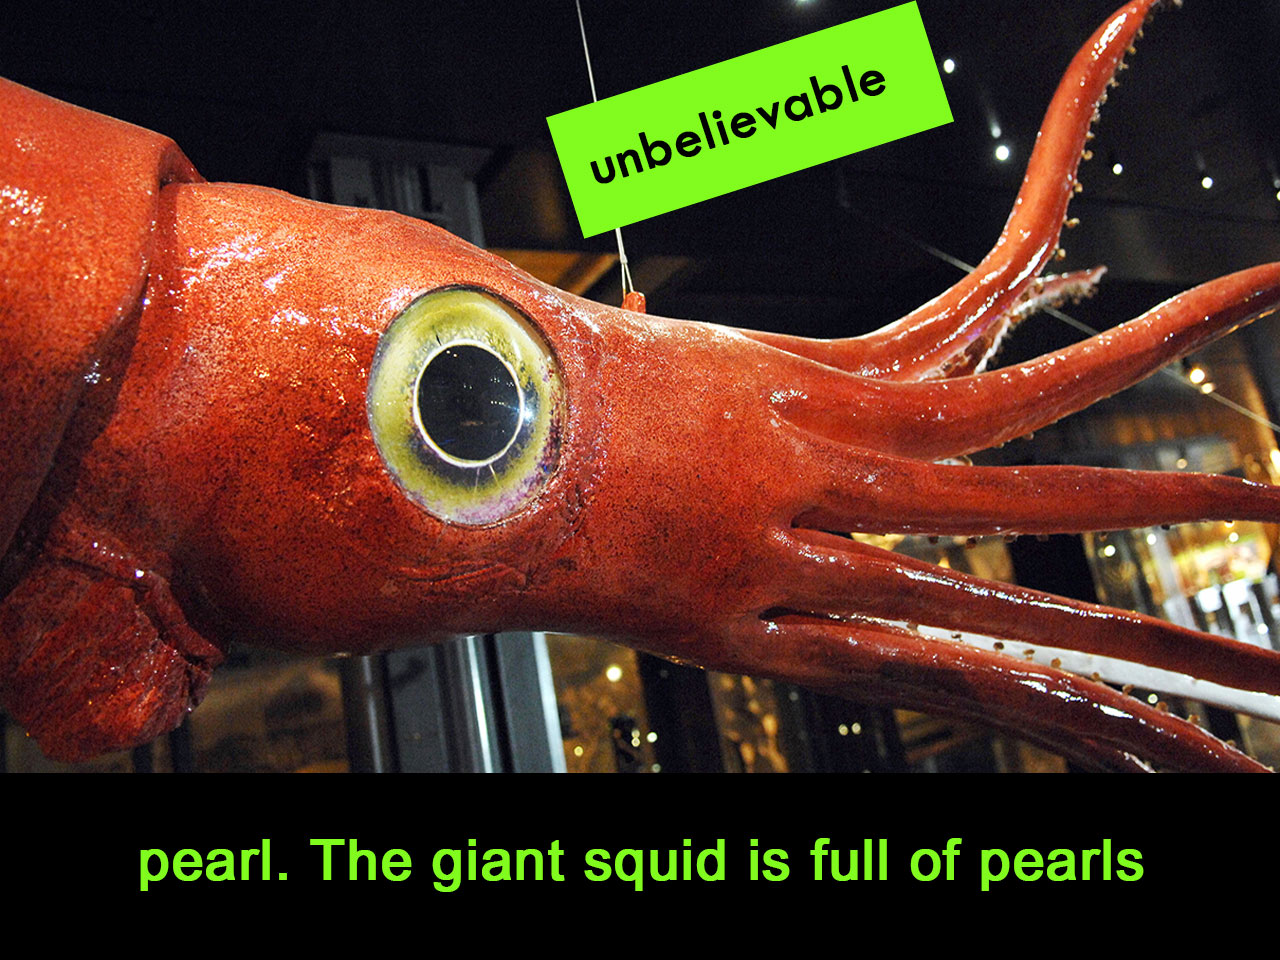 pearl. The giant squid is full of pearls